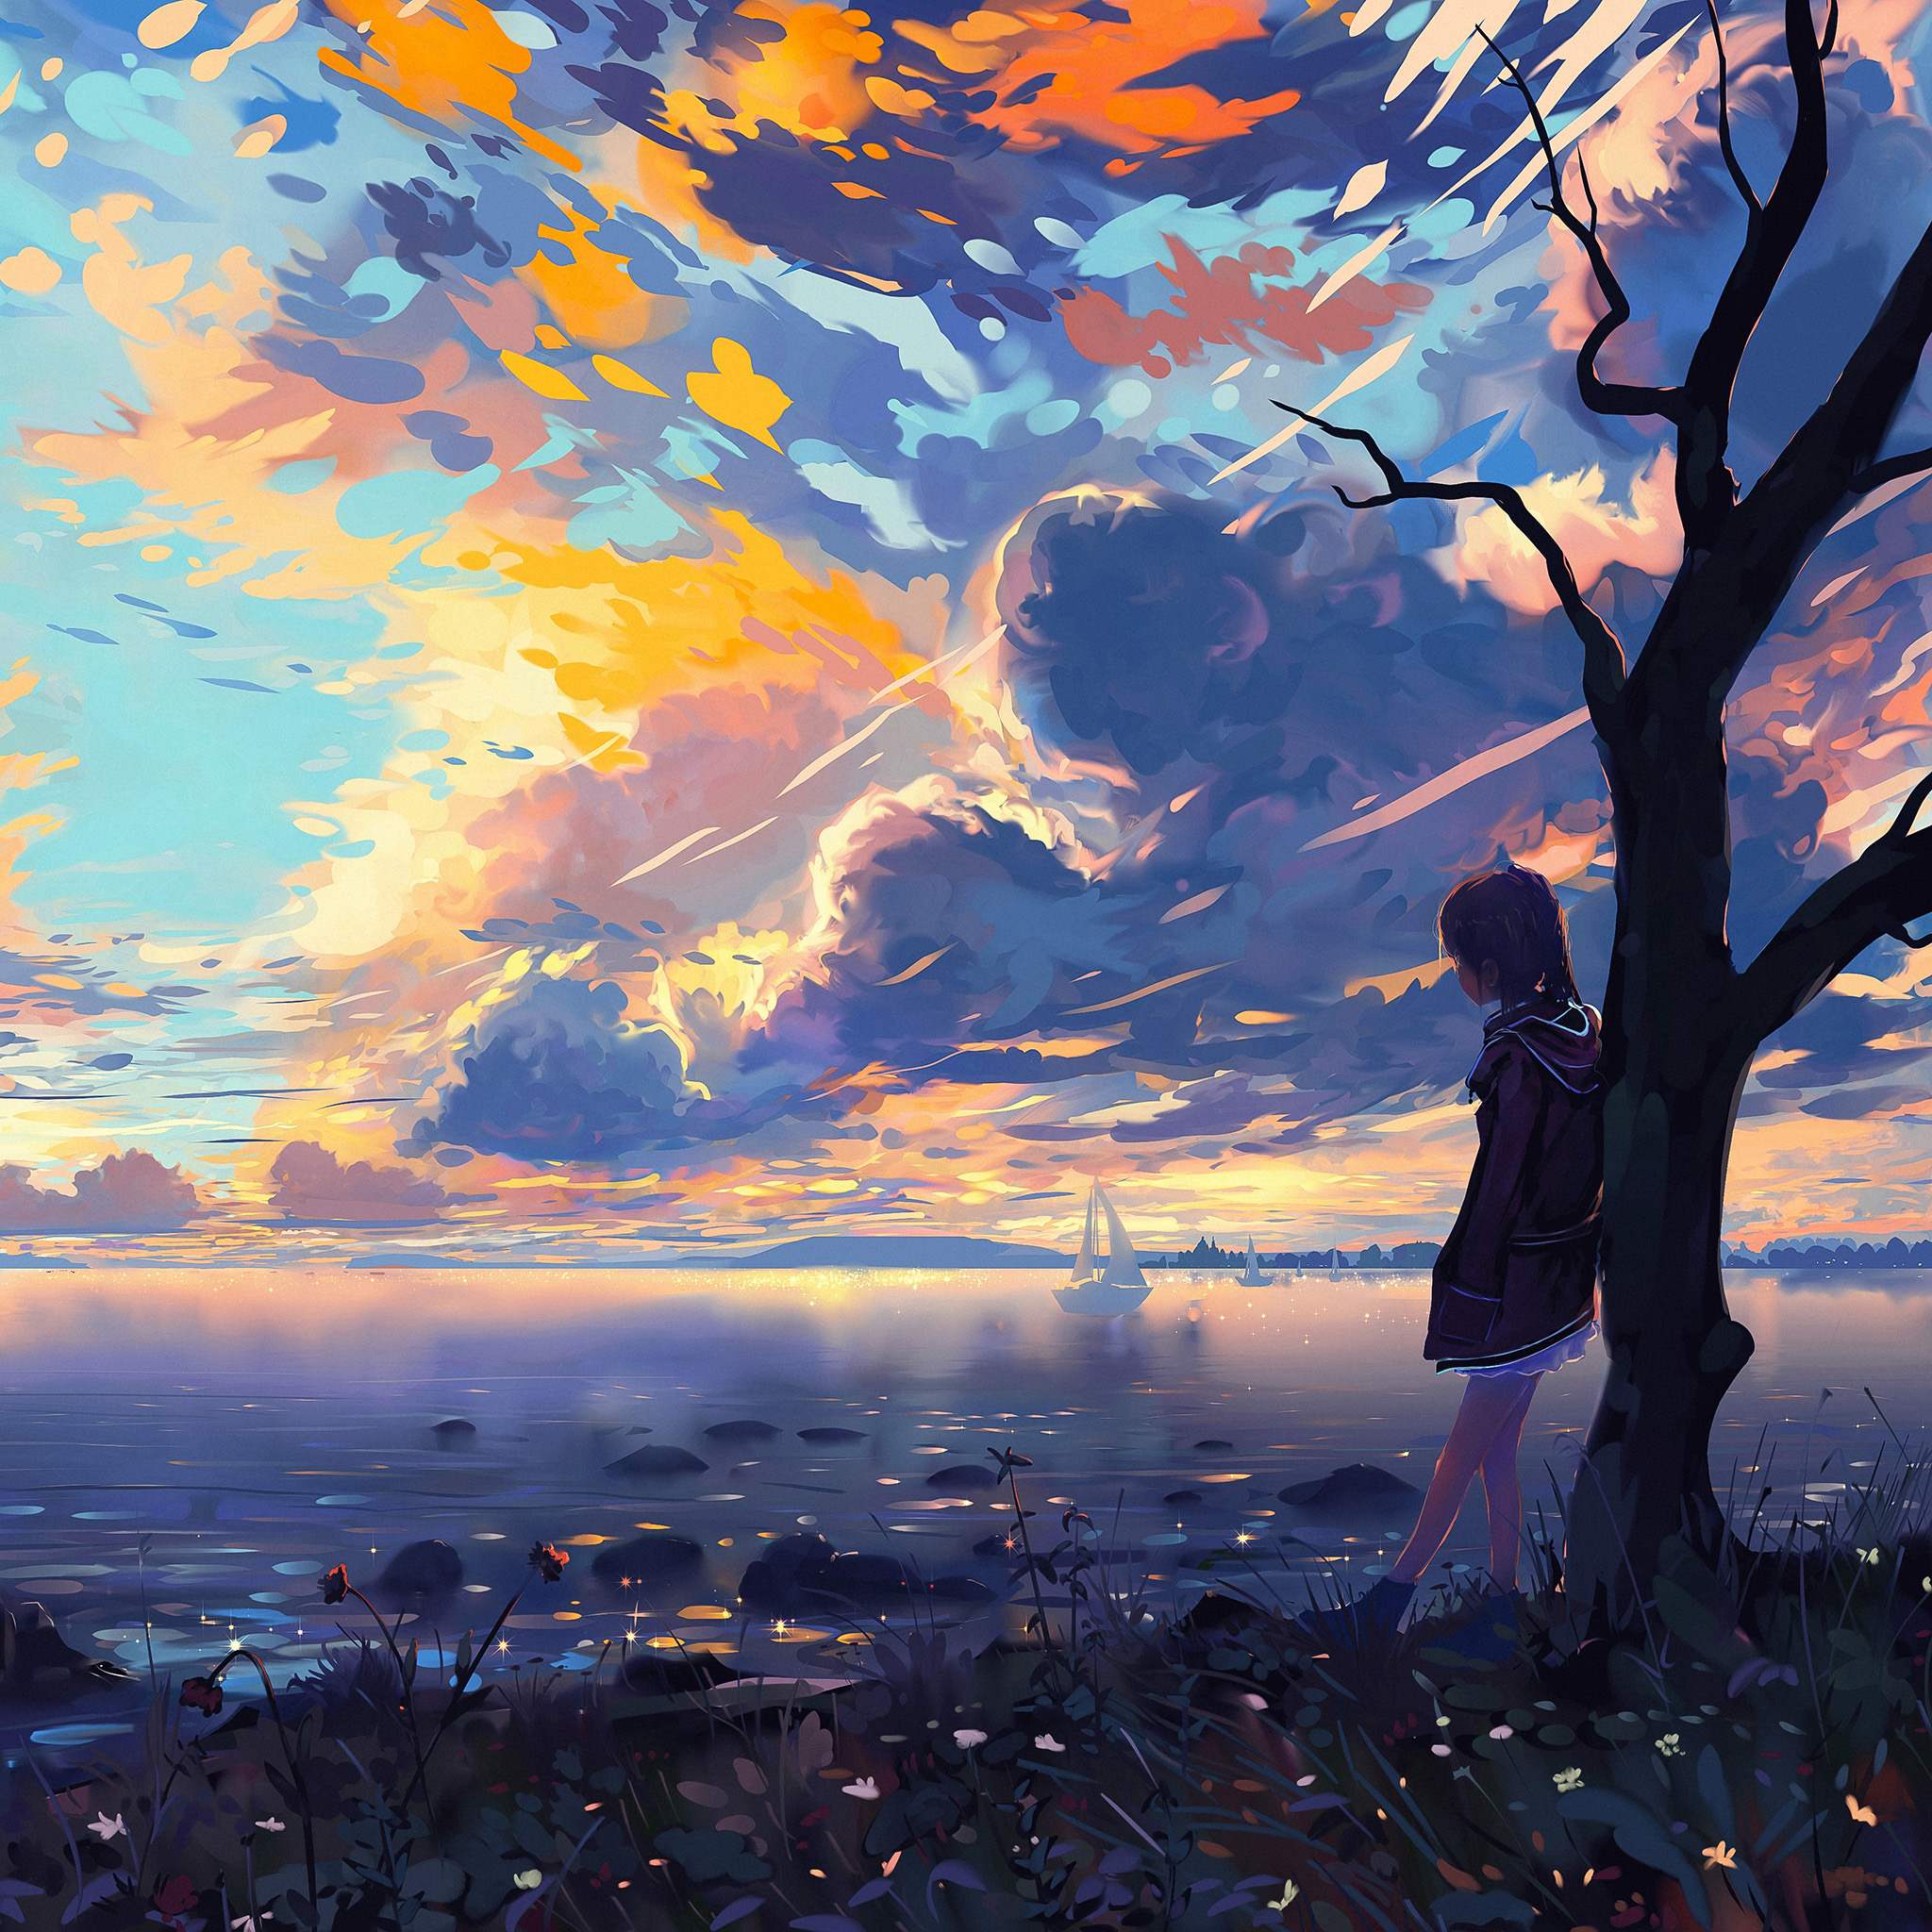 Anime 2048x2048 anime nature sky clouds anime girls leaning trees alone women outdoors